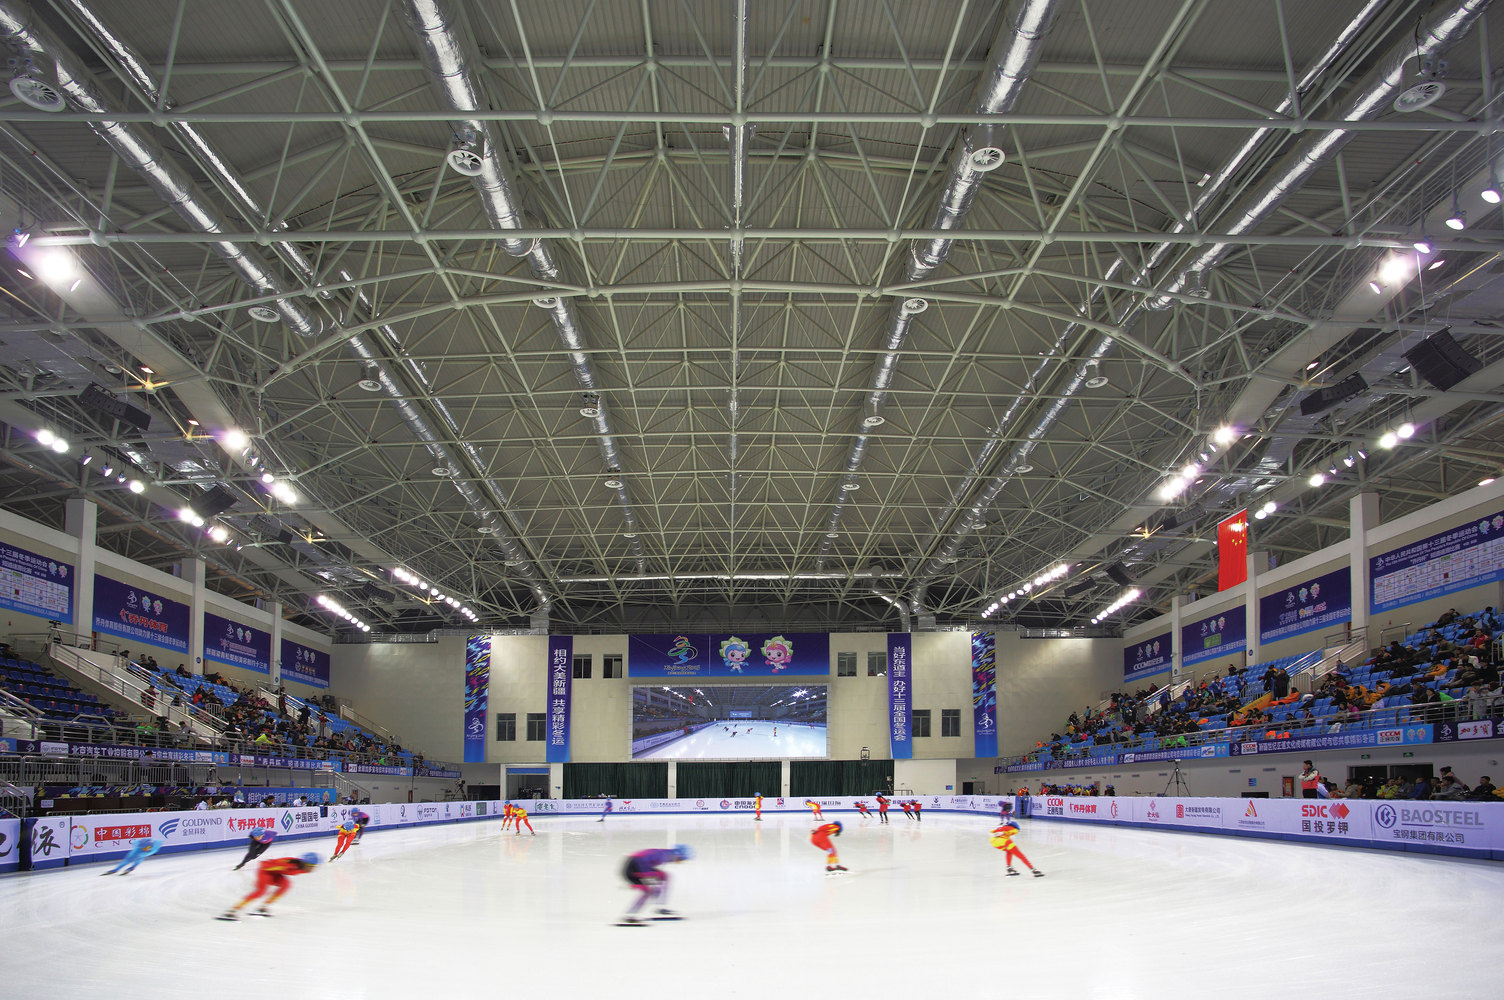 ice-sports-center-of-the-national-winter-games-10-interior-of-curling-hall.jpg